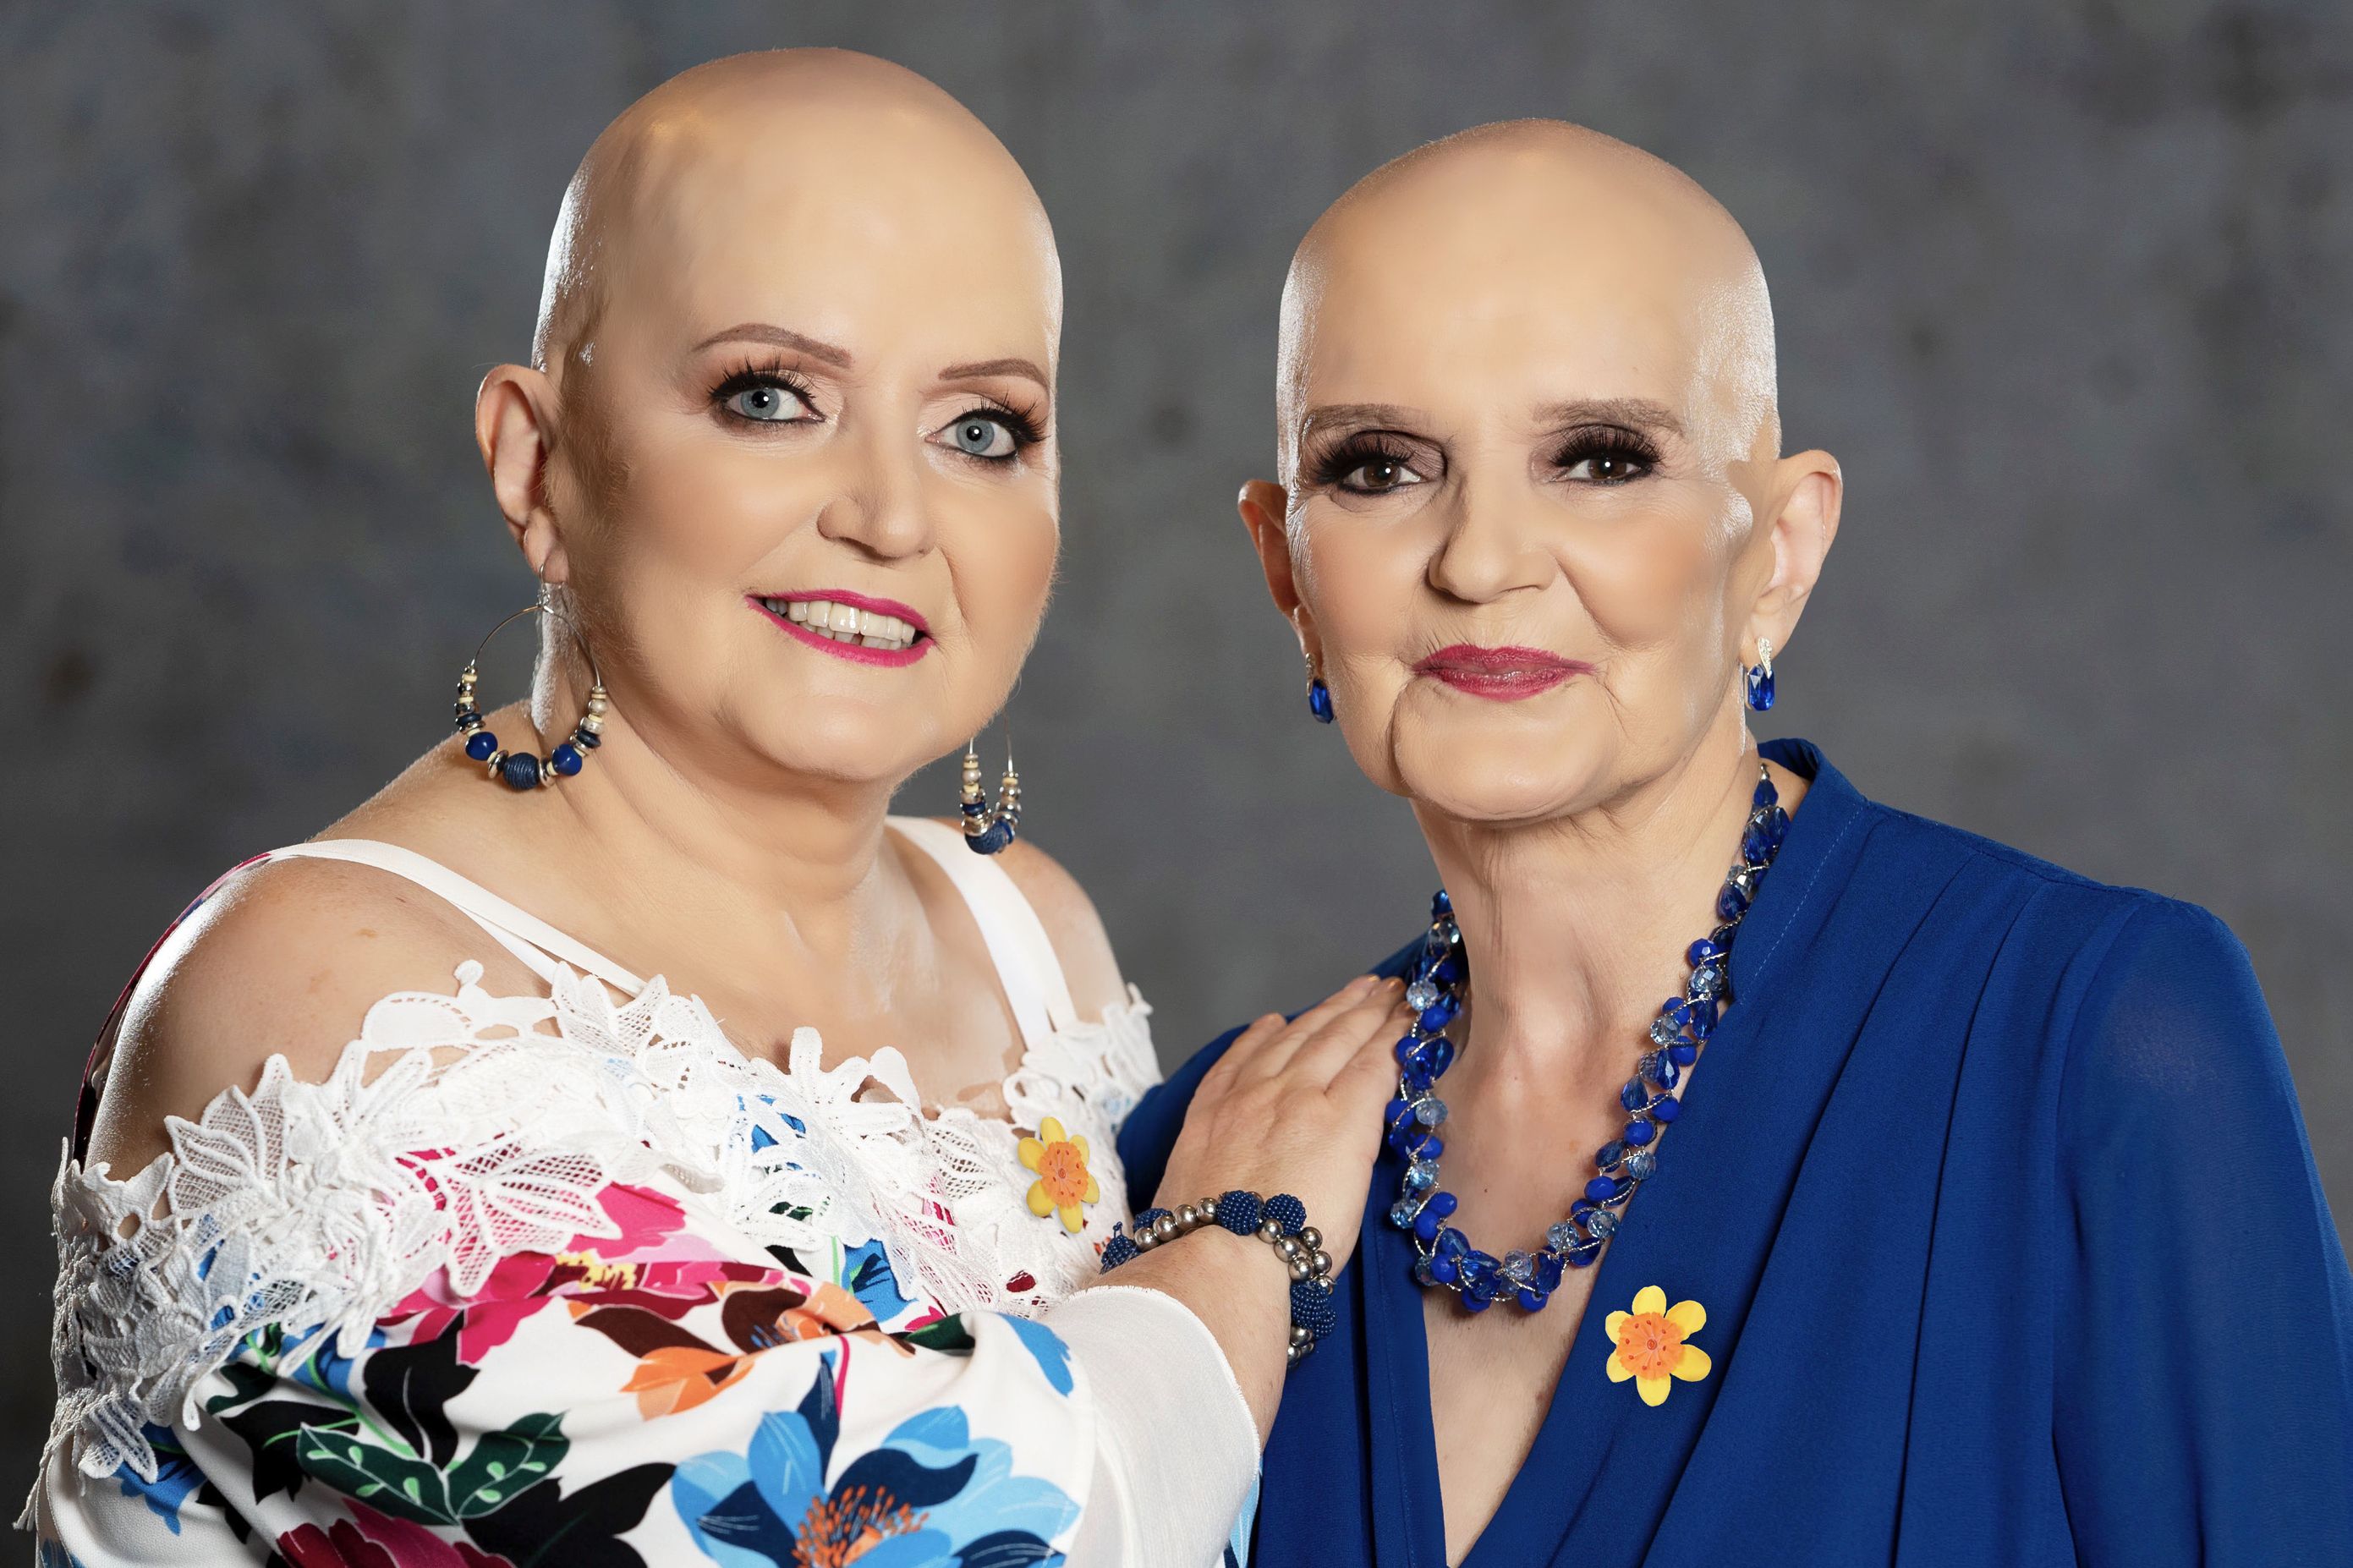 Cancer won't wait until the end of lockdown': Nolan sisters on